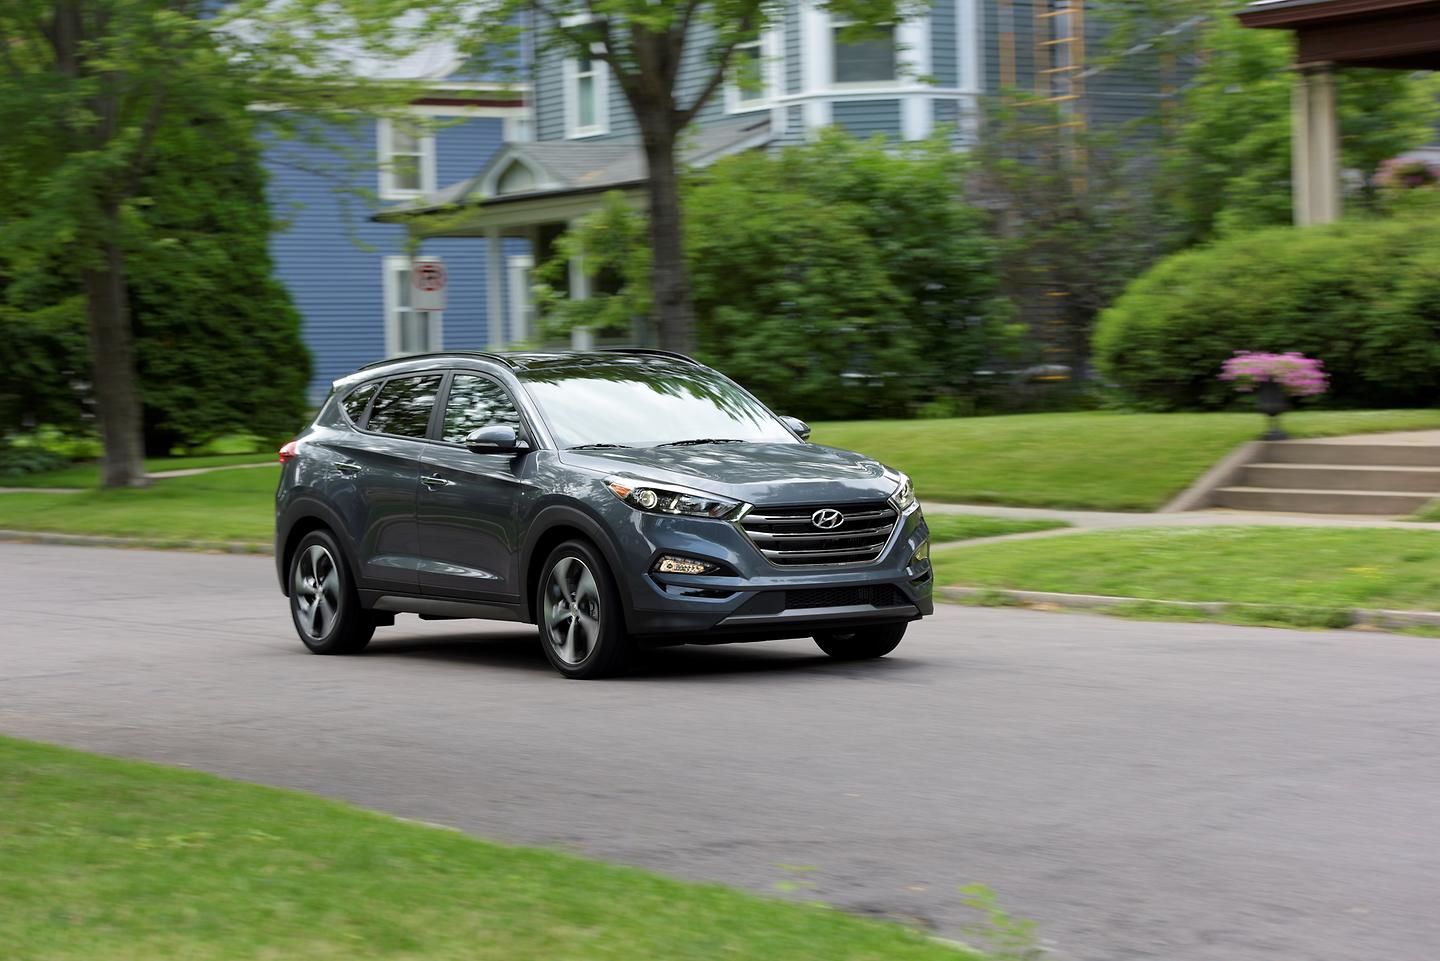 Hyundai Tucson Named One of the 10 Best Family Cars by Parents Magazine and Edmunds.com